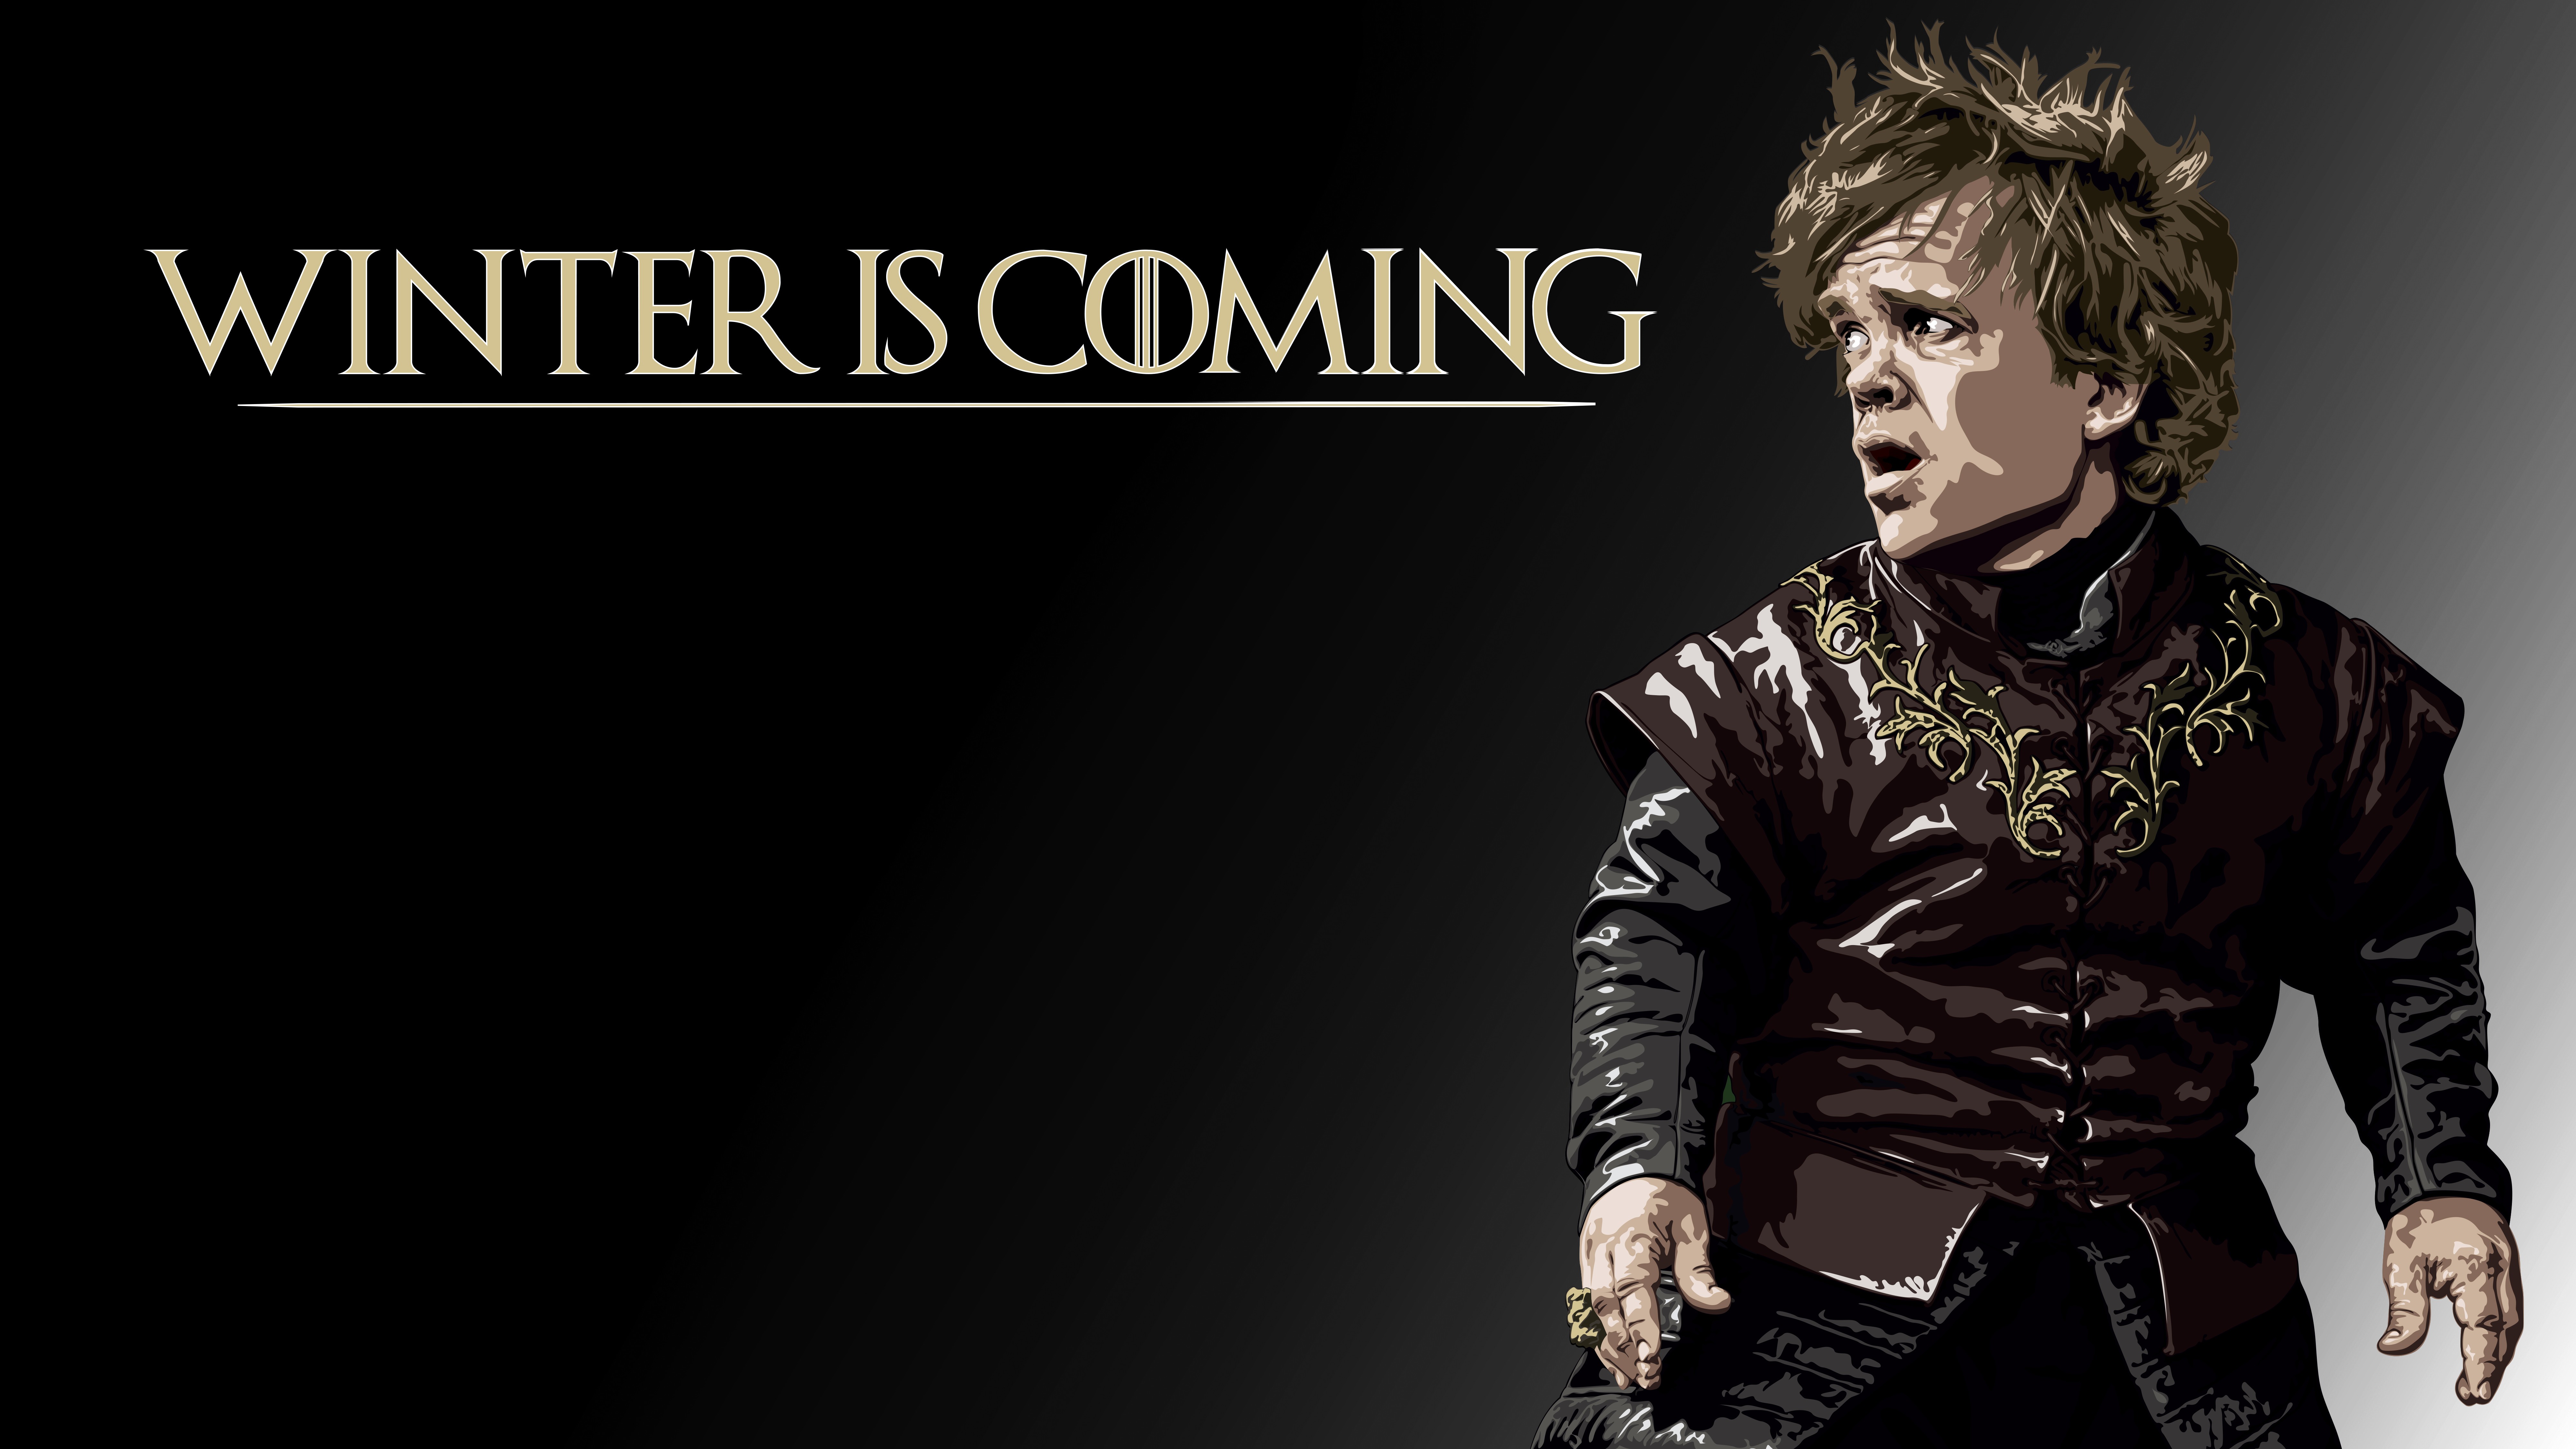 General 8000x4500 popculture men Game of Thrones Winter Is Coming Peter Dinklage Tyrion Lannister TV series simple background black background Book characters actor